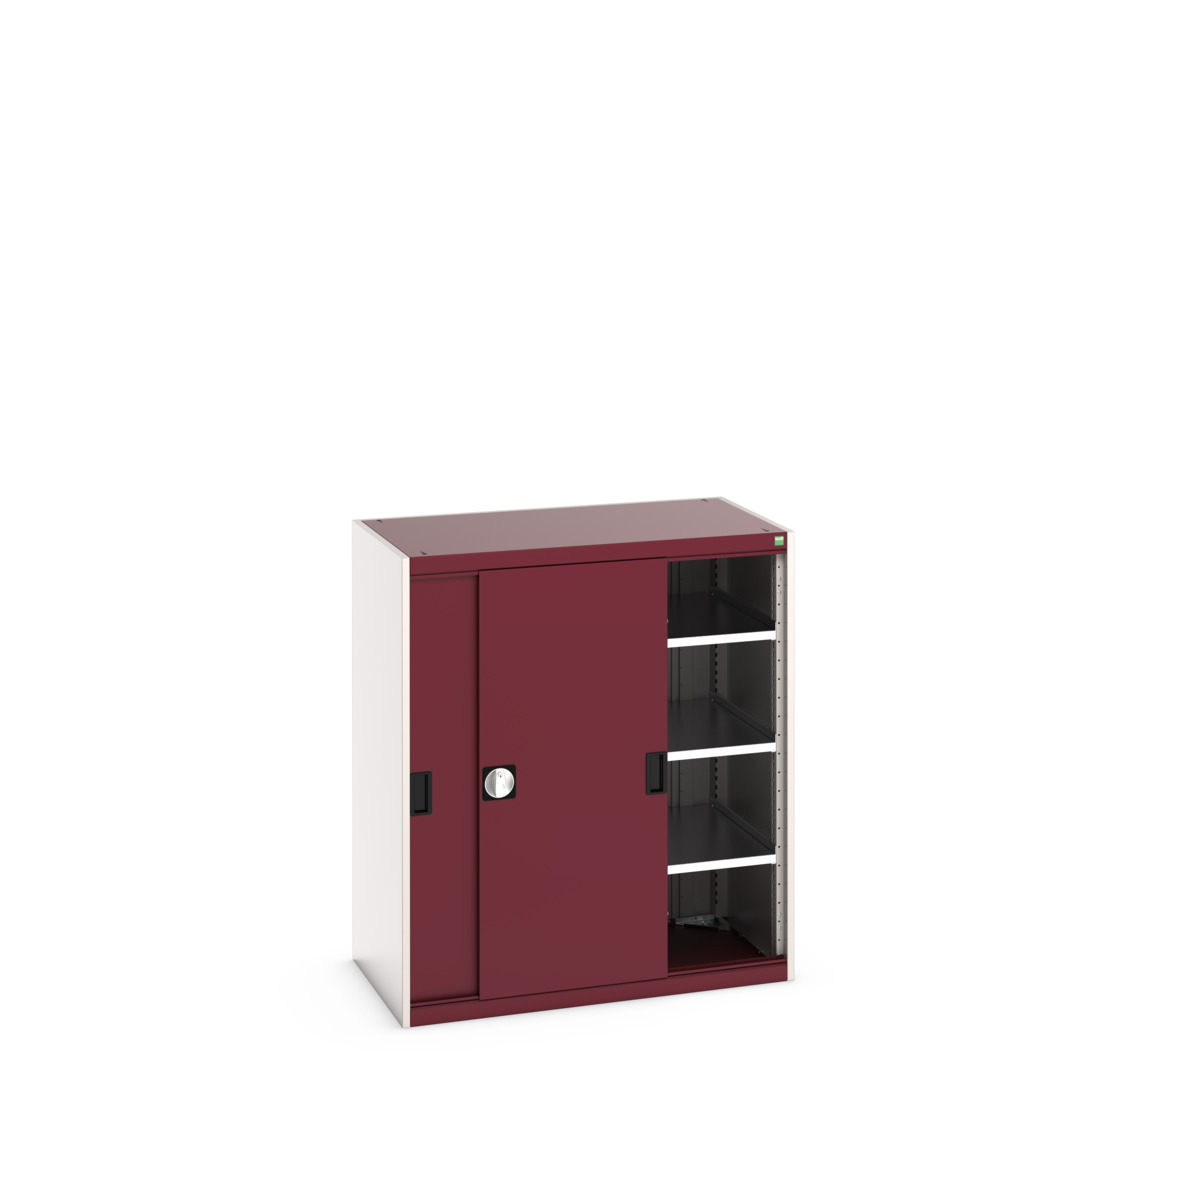 40021139.24V - Armoire Cubio SMS-10612-1